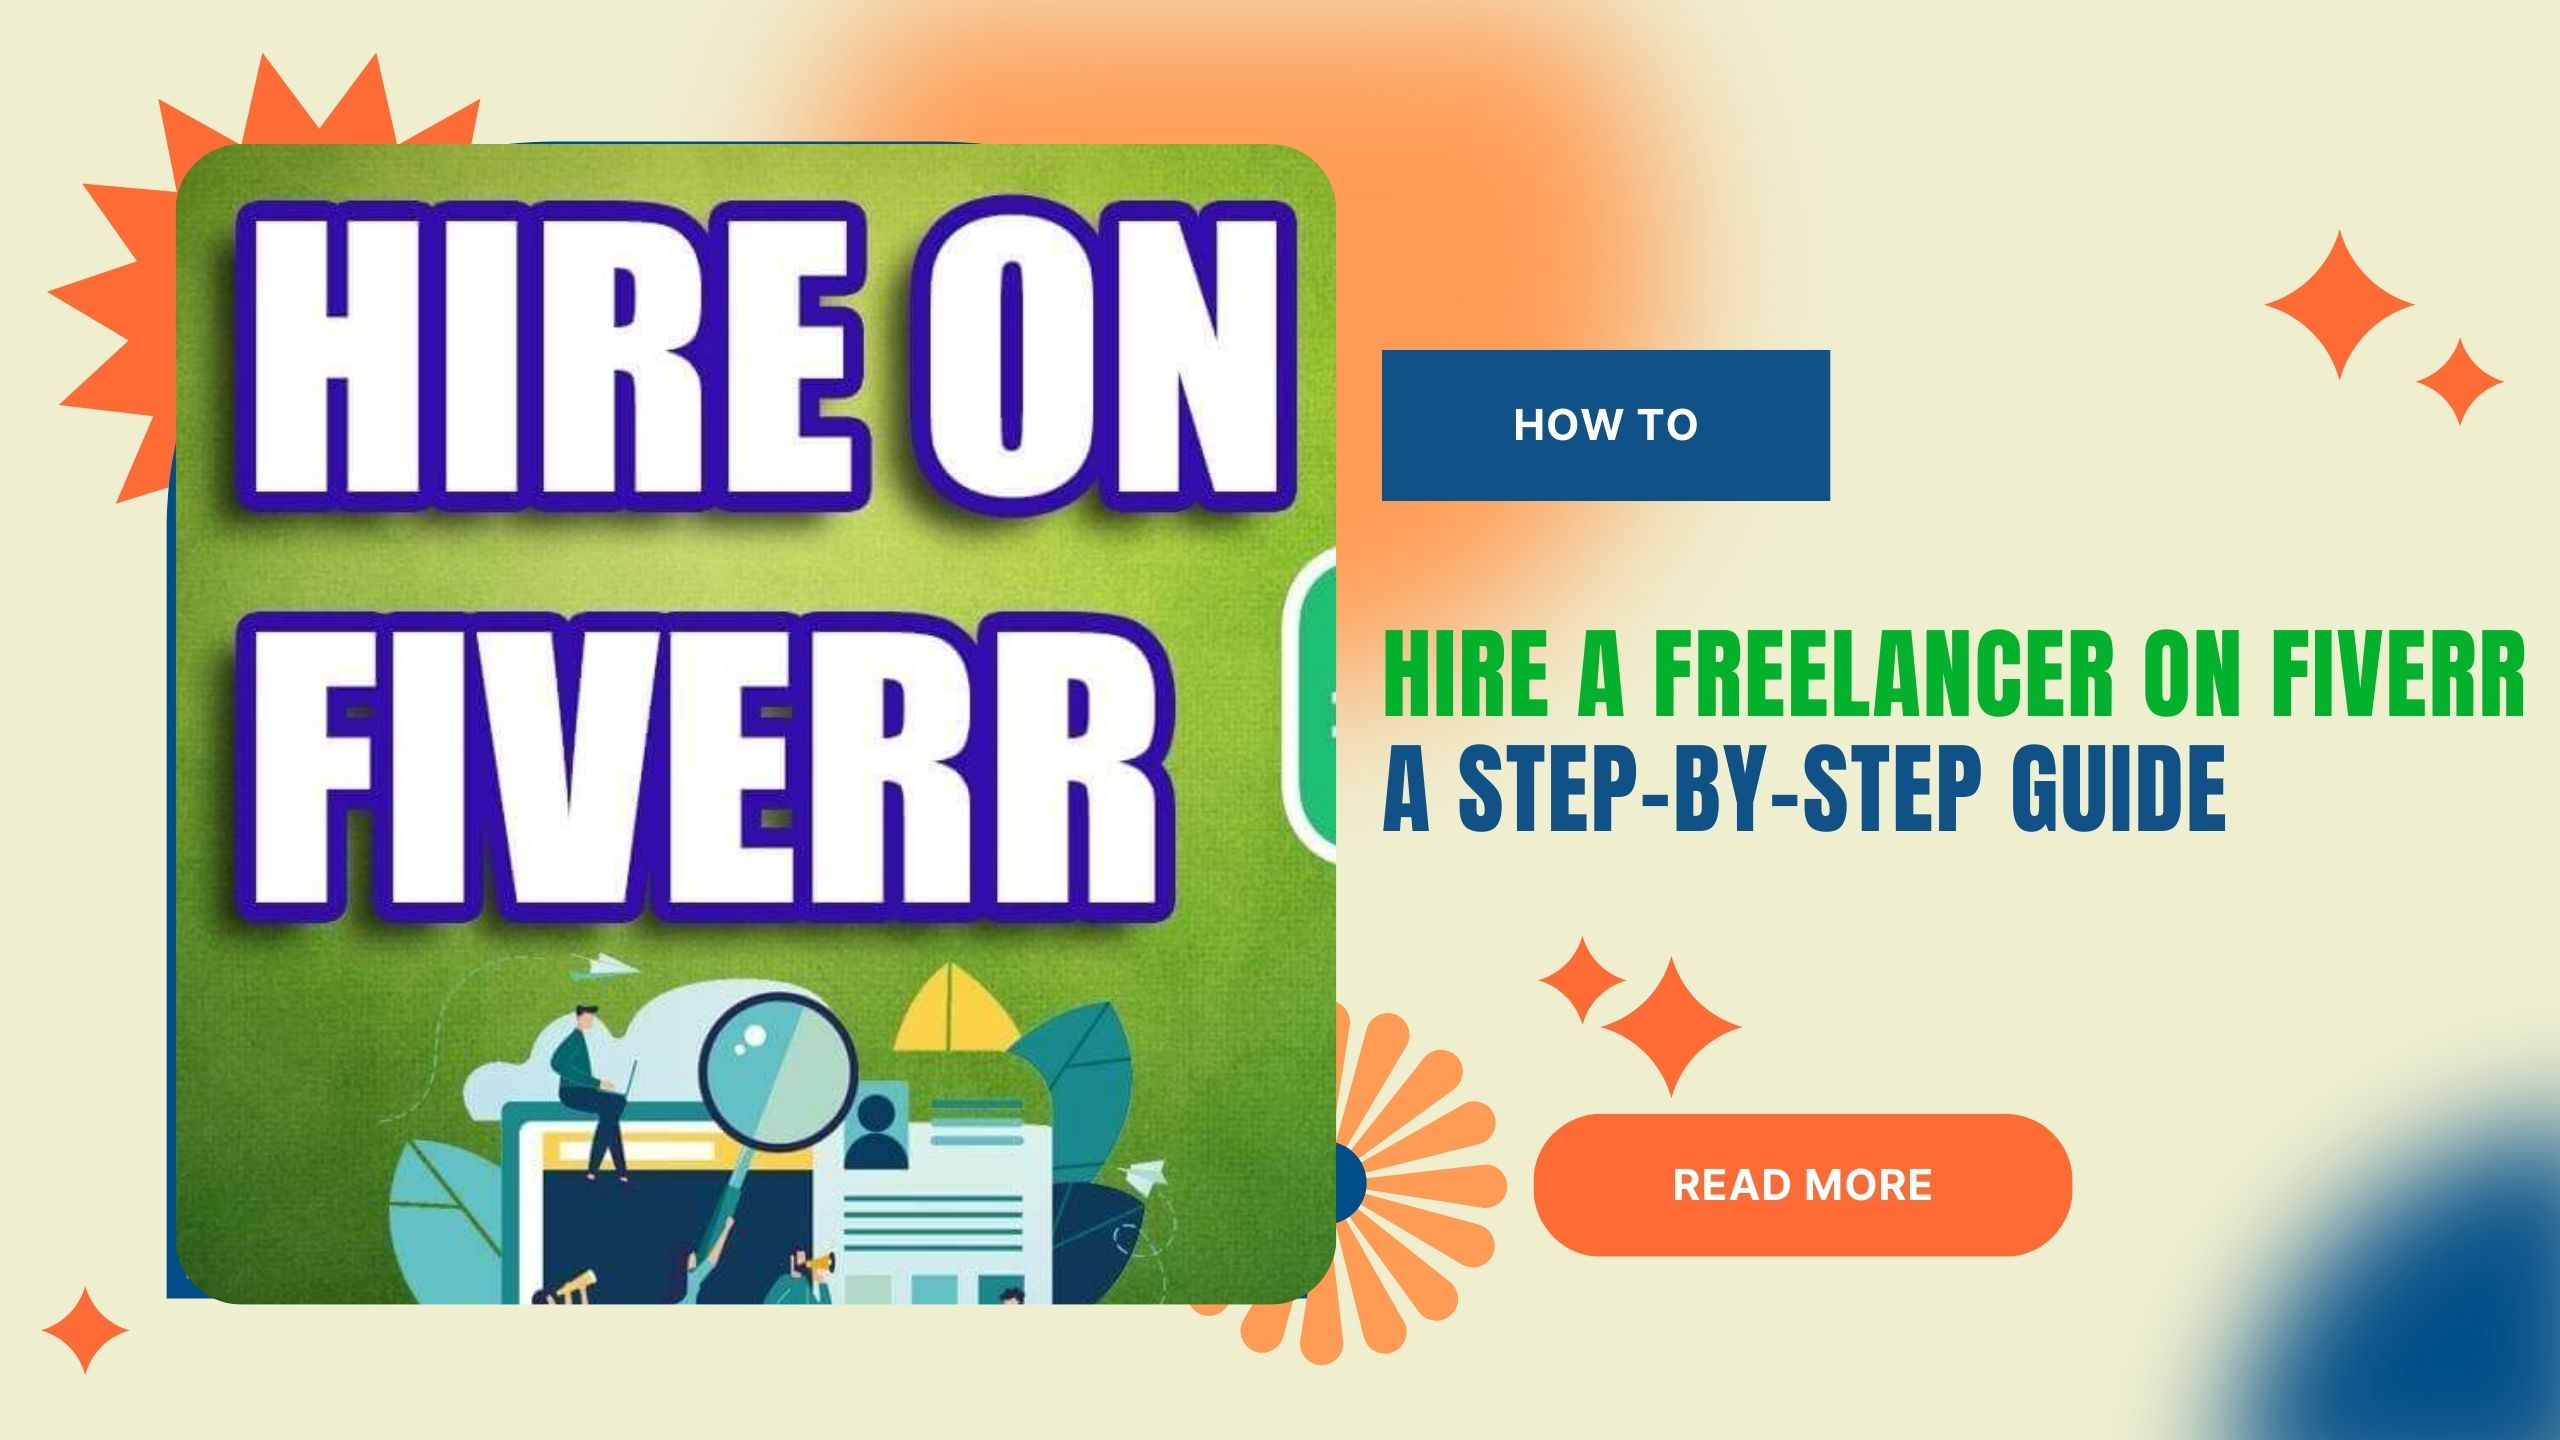 How to Hire a Freelancer on Fiverr: A Step-by-Step Guide